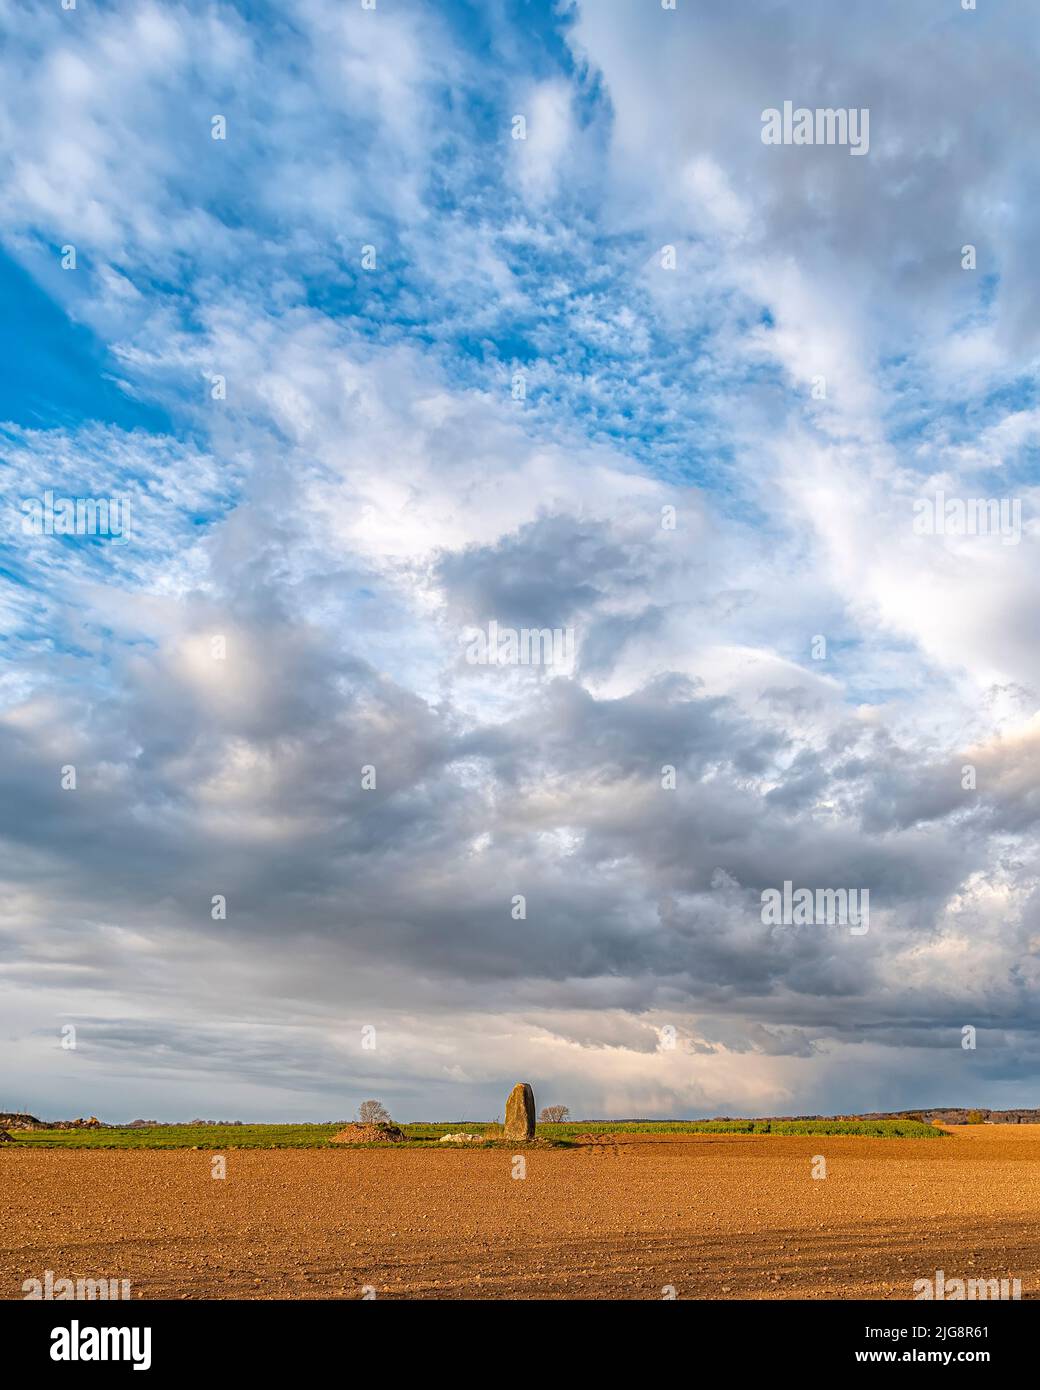 A single standing stone in the Swedish countryside against a dramatic cloudy sky Stock Photo